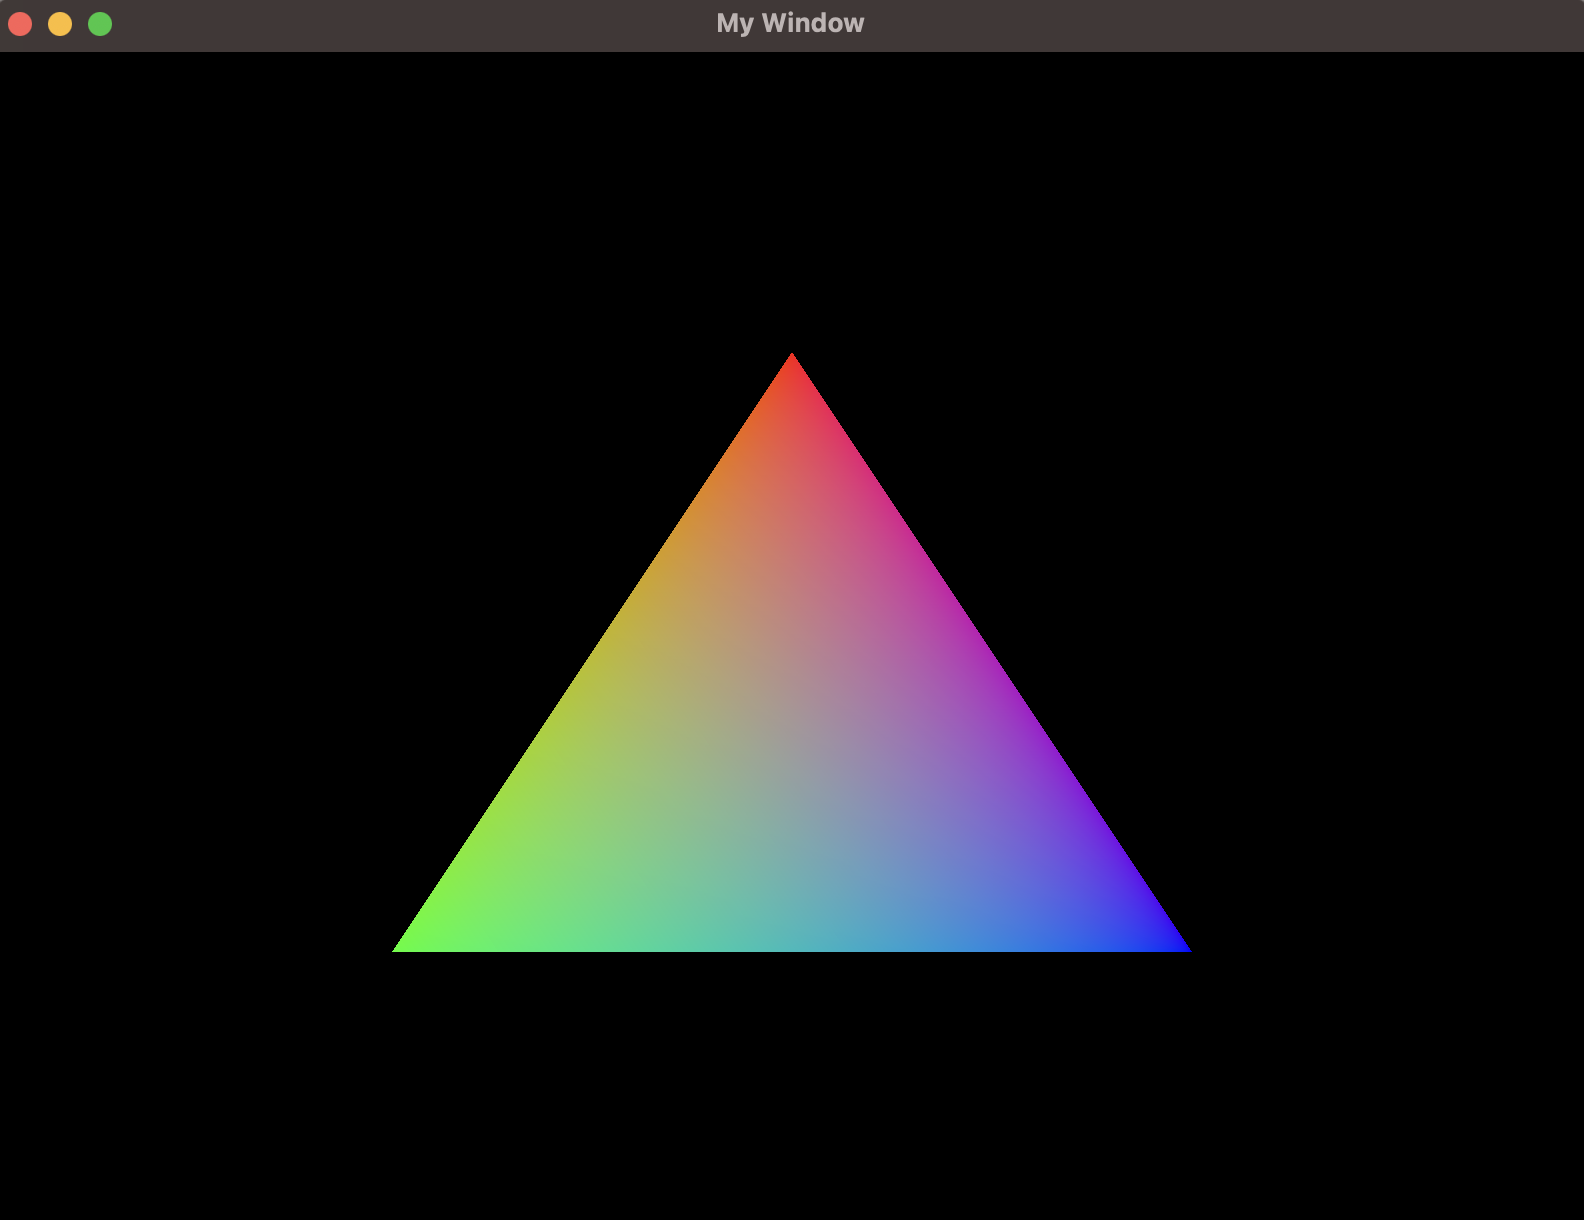 A window with a multi-color triangle